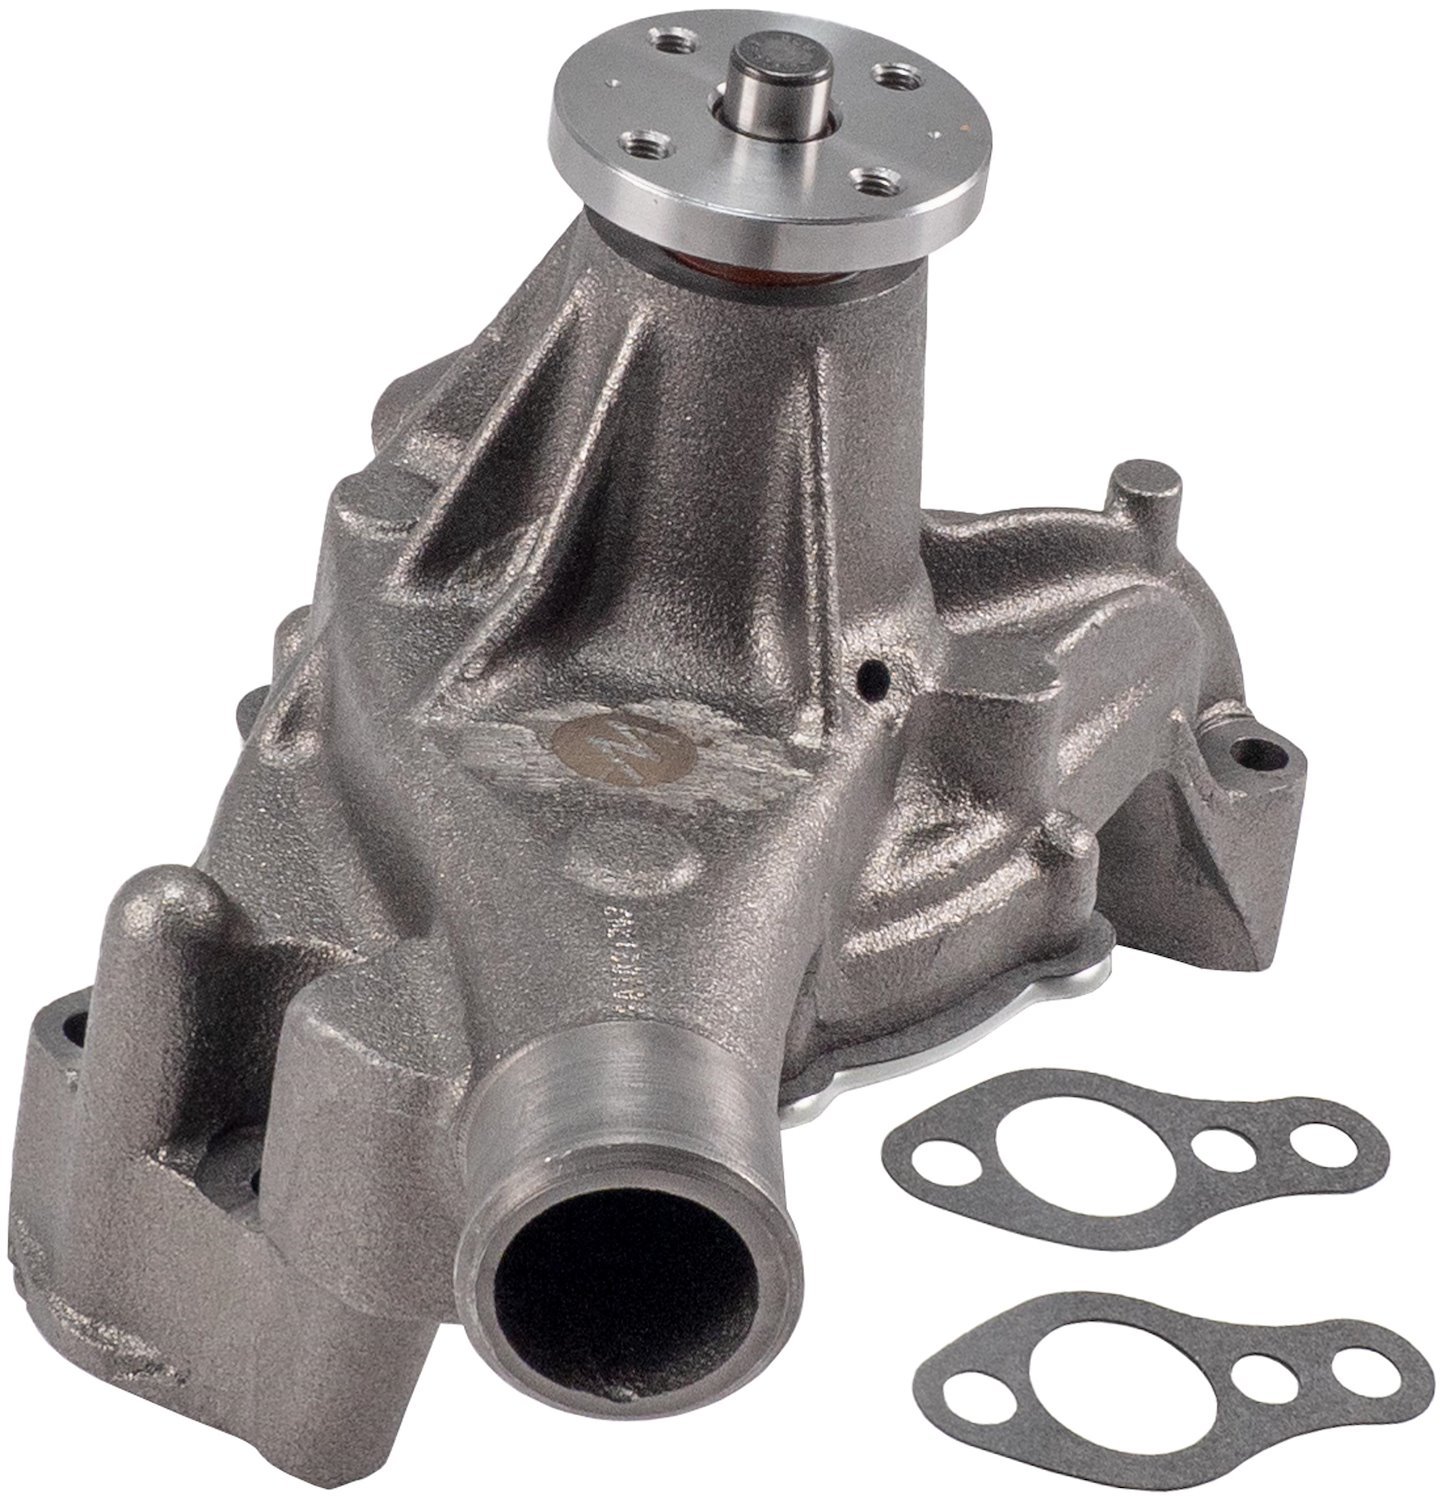 Water Pump Fits Select 1987-1995 GM 4.3/5.0/5.7L Engines